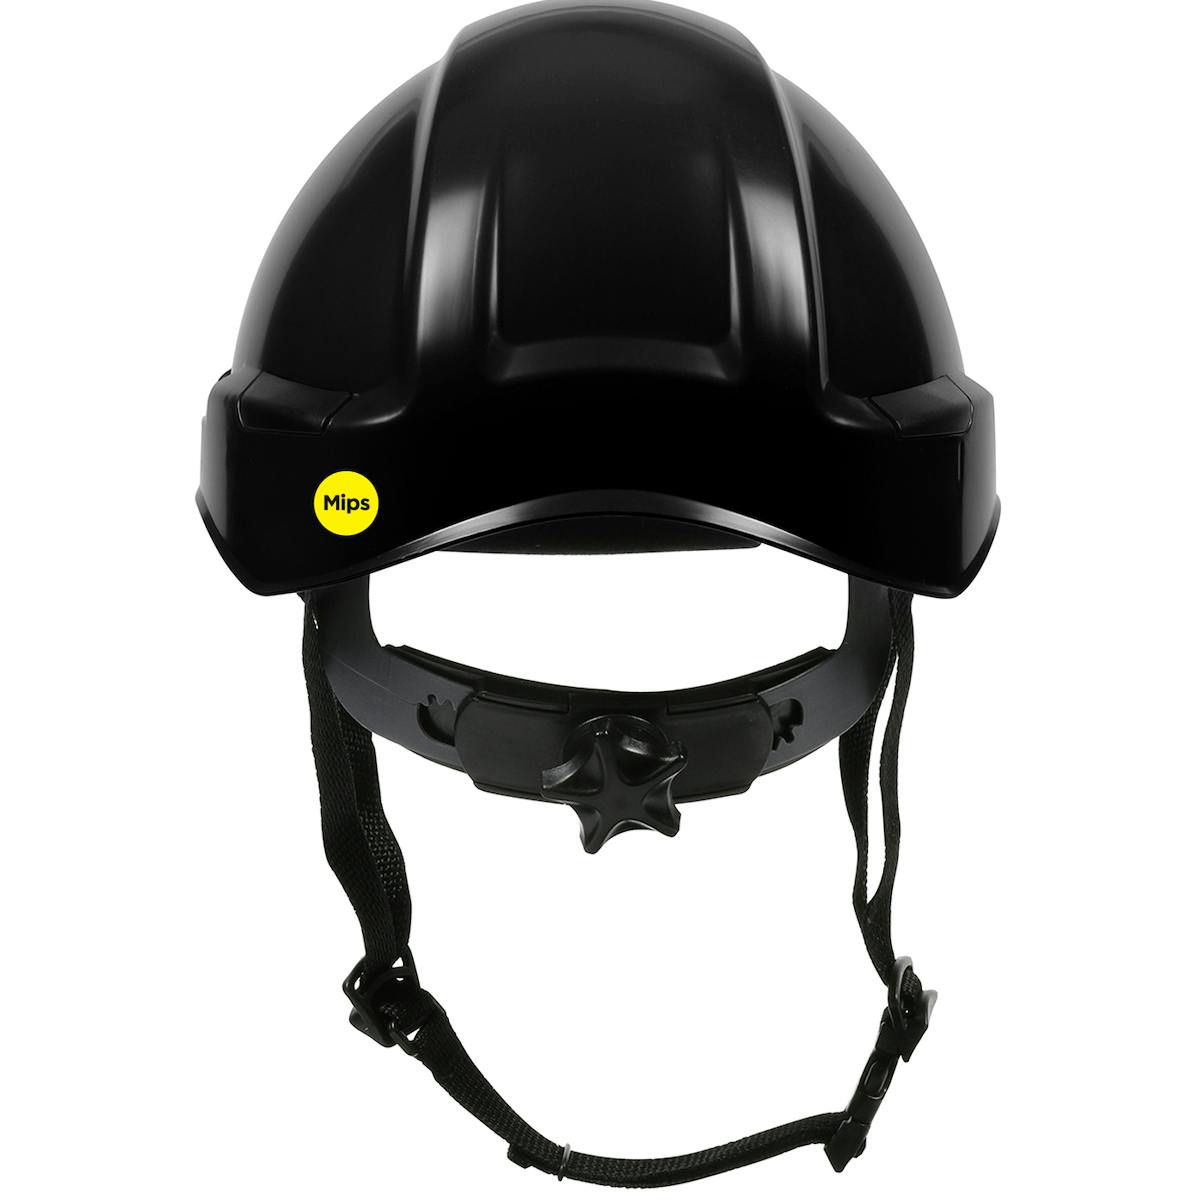 Rocky™ Industrial Climbing Helmet with Mips® Technology, Polycarbonate/ABS Shell, Hi-Density Foam Impact Liner, Nylon Suspension, Wheel Ratchet Adjustment and 4-Point Chin Strap (280-HP142RM)_0